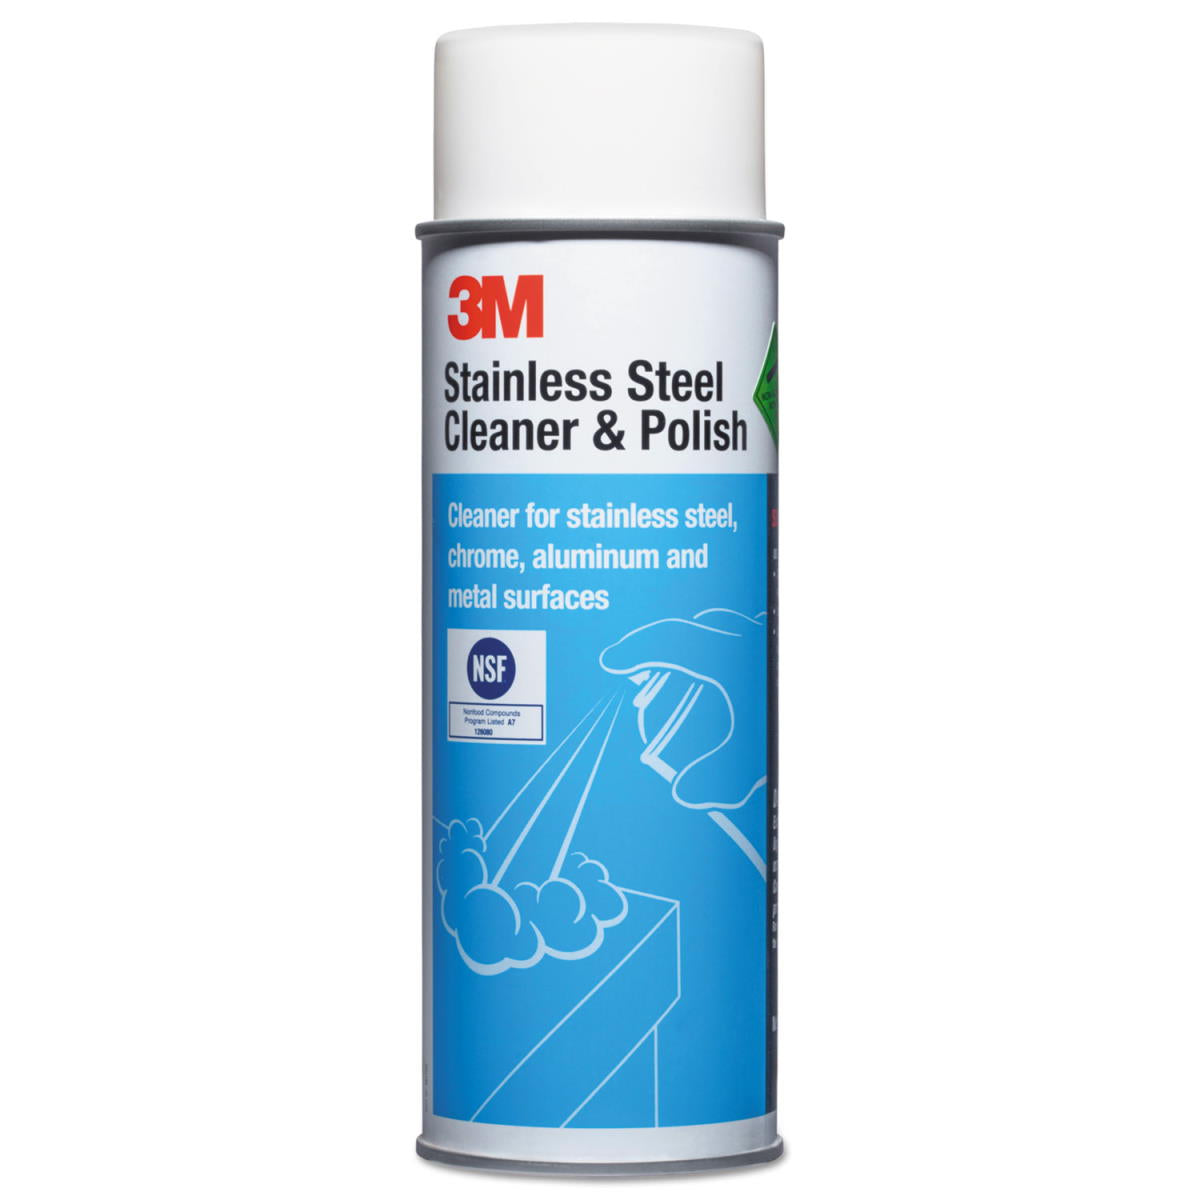 3M™ Stainless Steel Cleaner & Polish (21 oz Aerosol Cans) - Case of 12 —